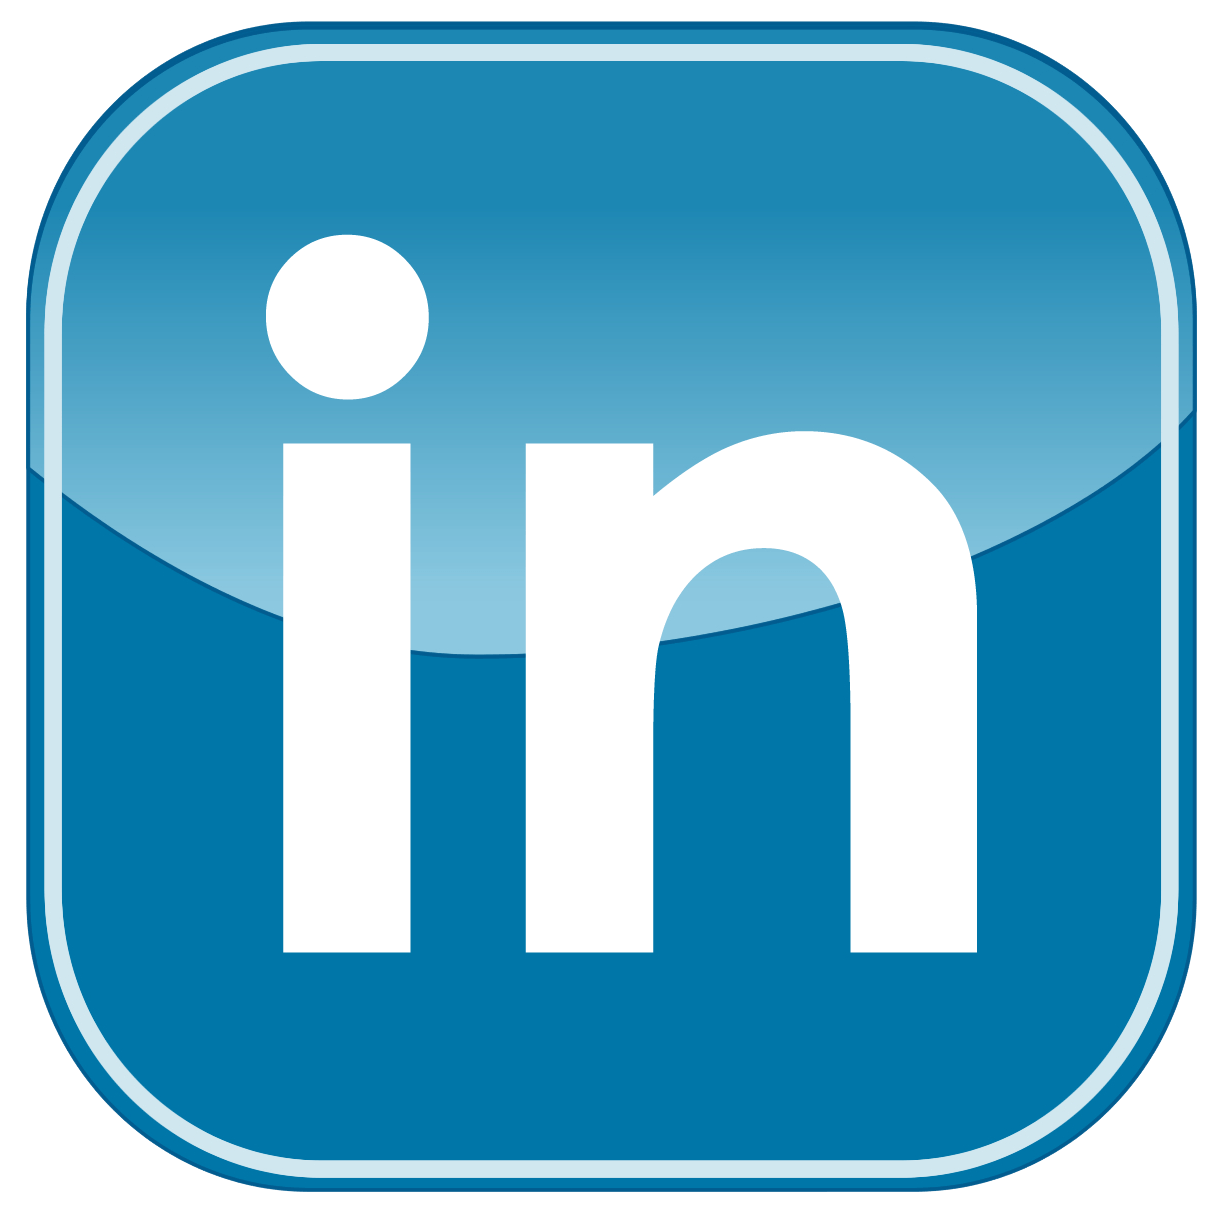 Official LinkedIn Logo - LinkedIn LOGO LinkedIn Logo, Icon, GIF, Transparent PNG